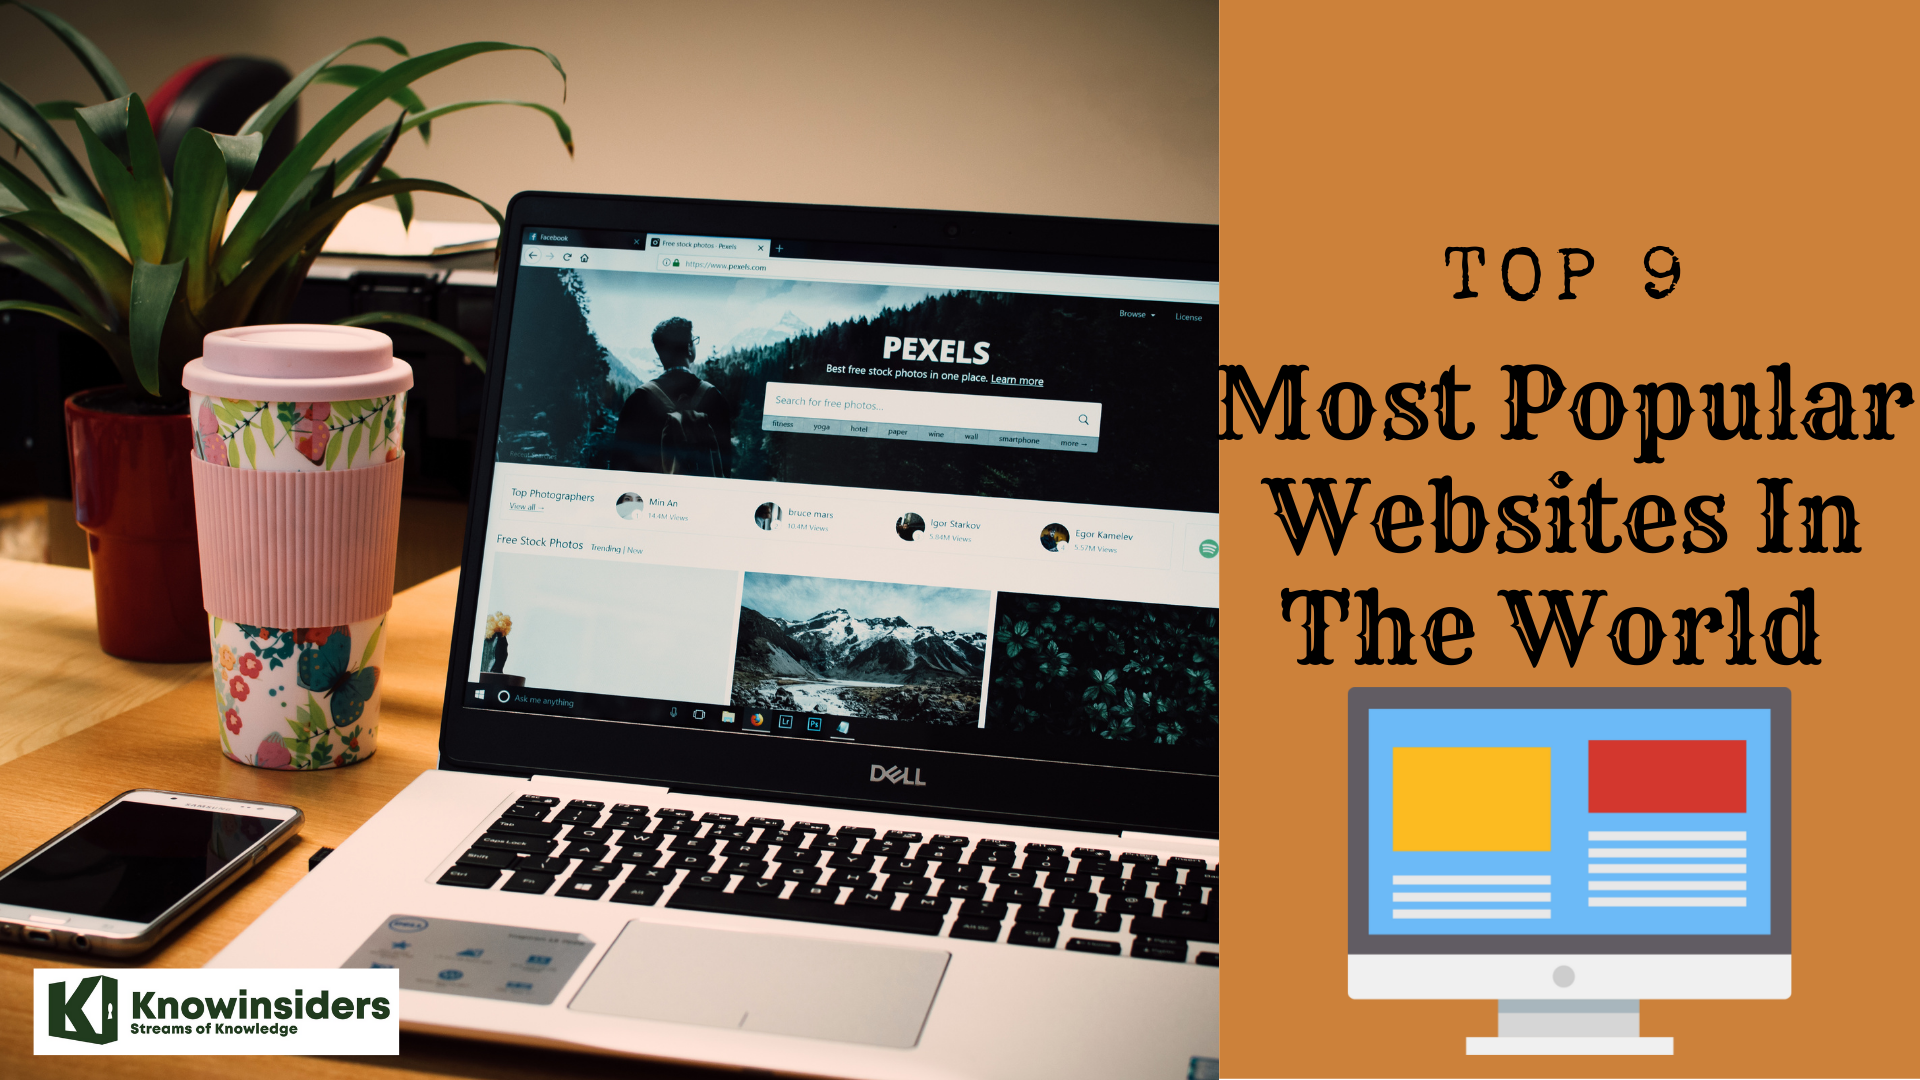 Top 9 most popular websites in the world 